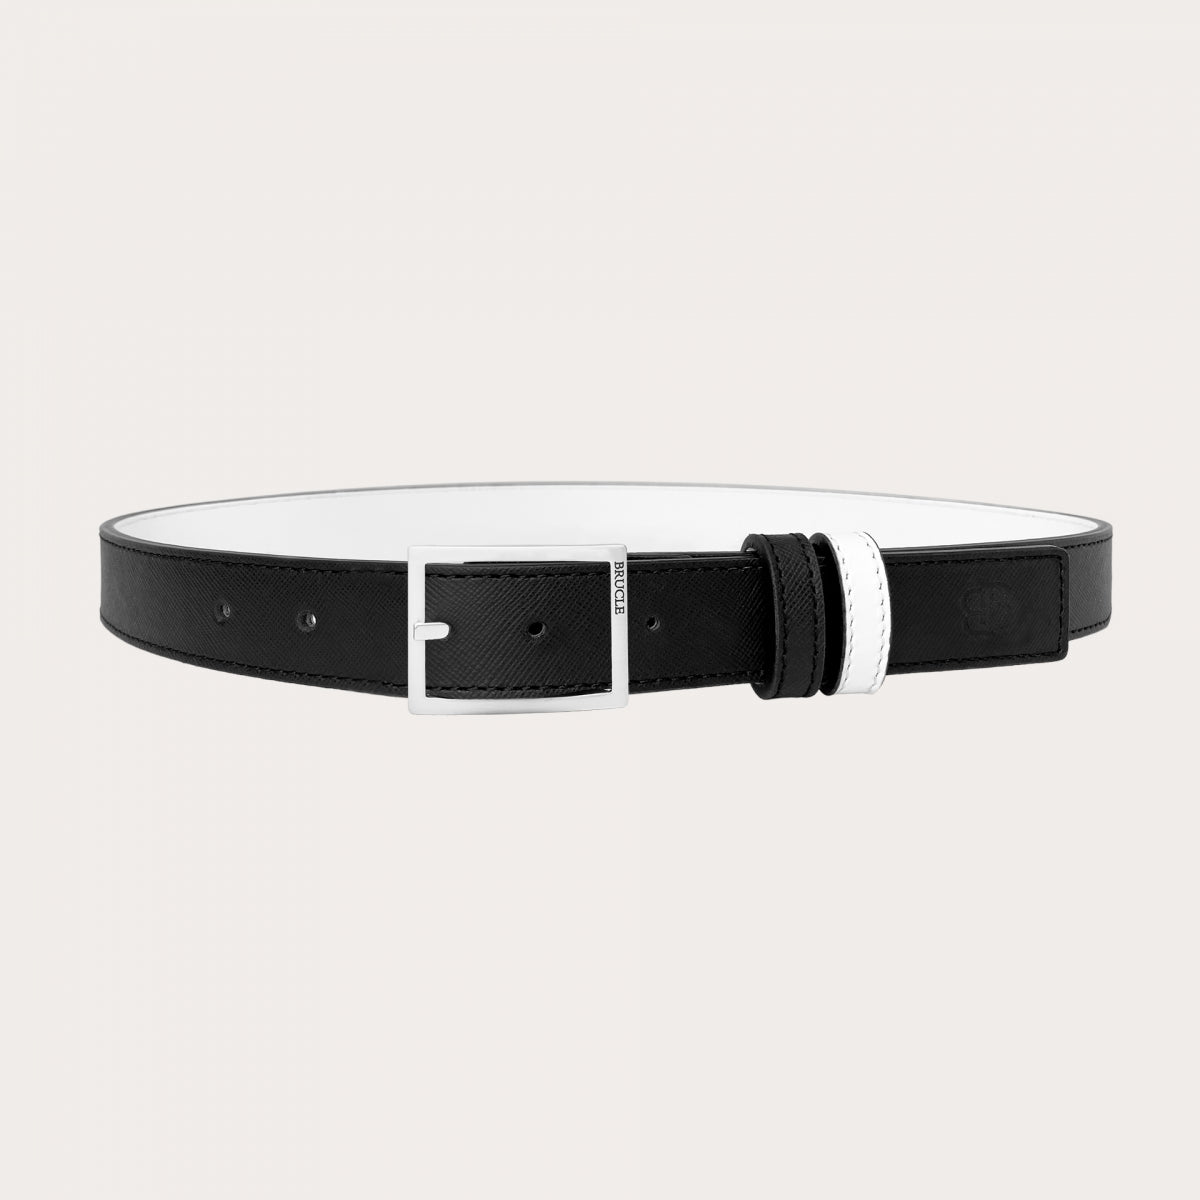 Reversible belt in black saffiano and white leather